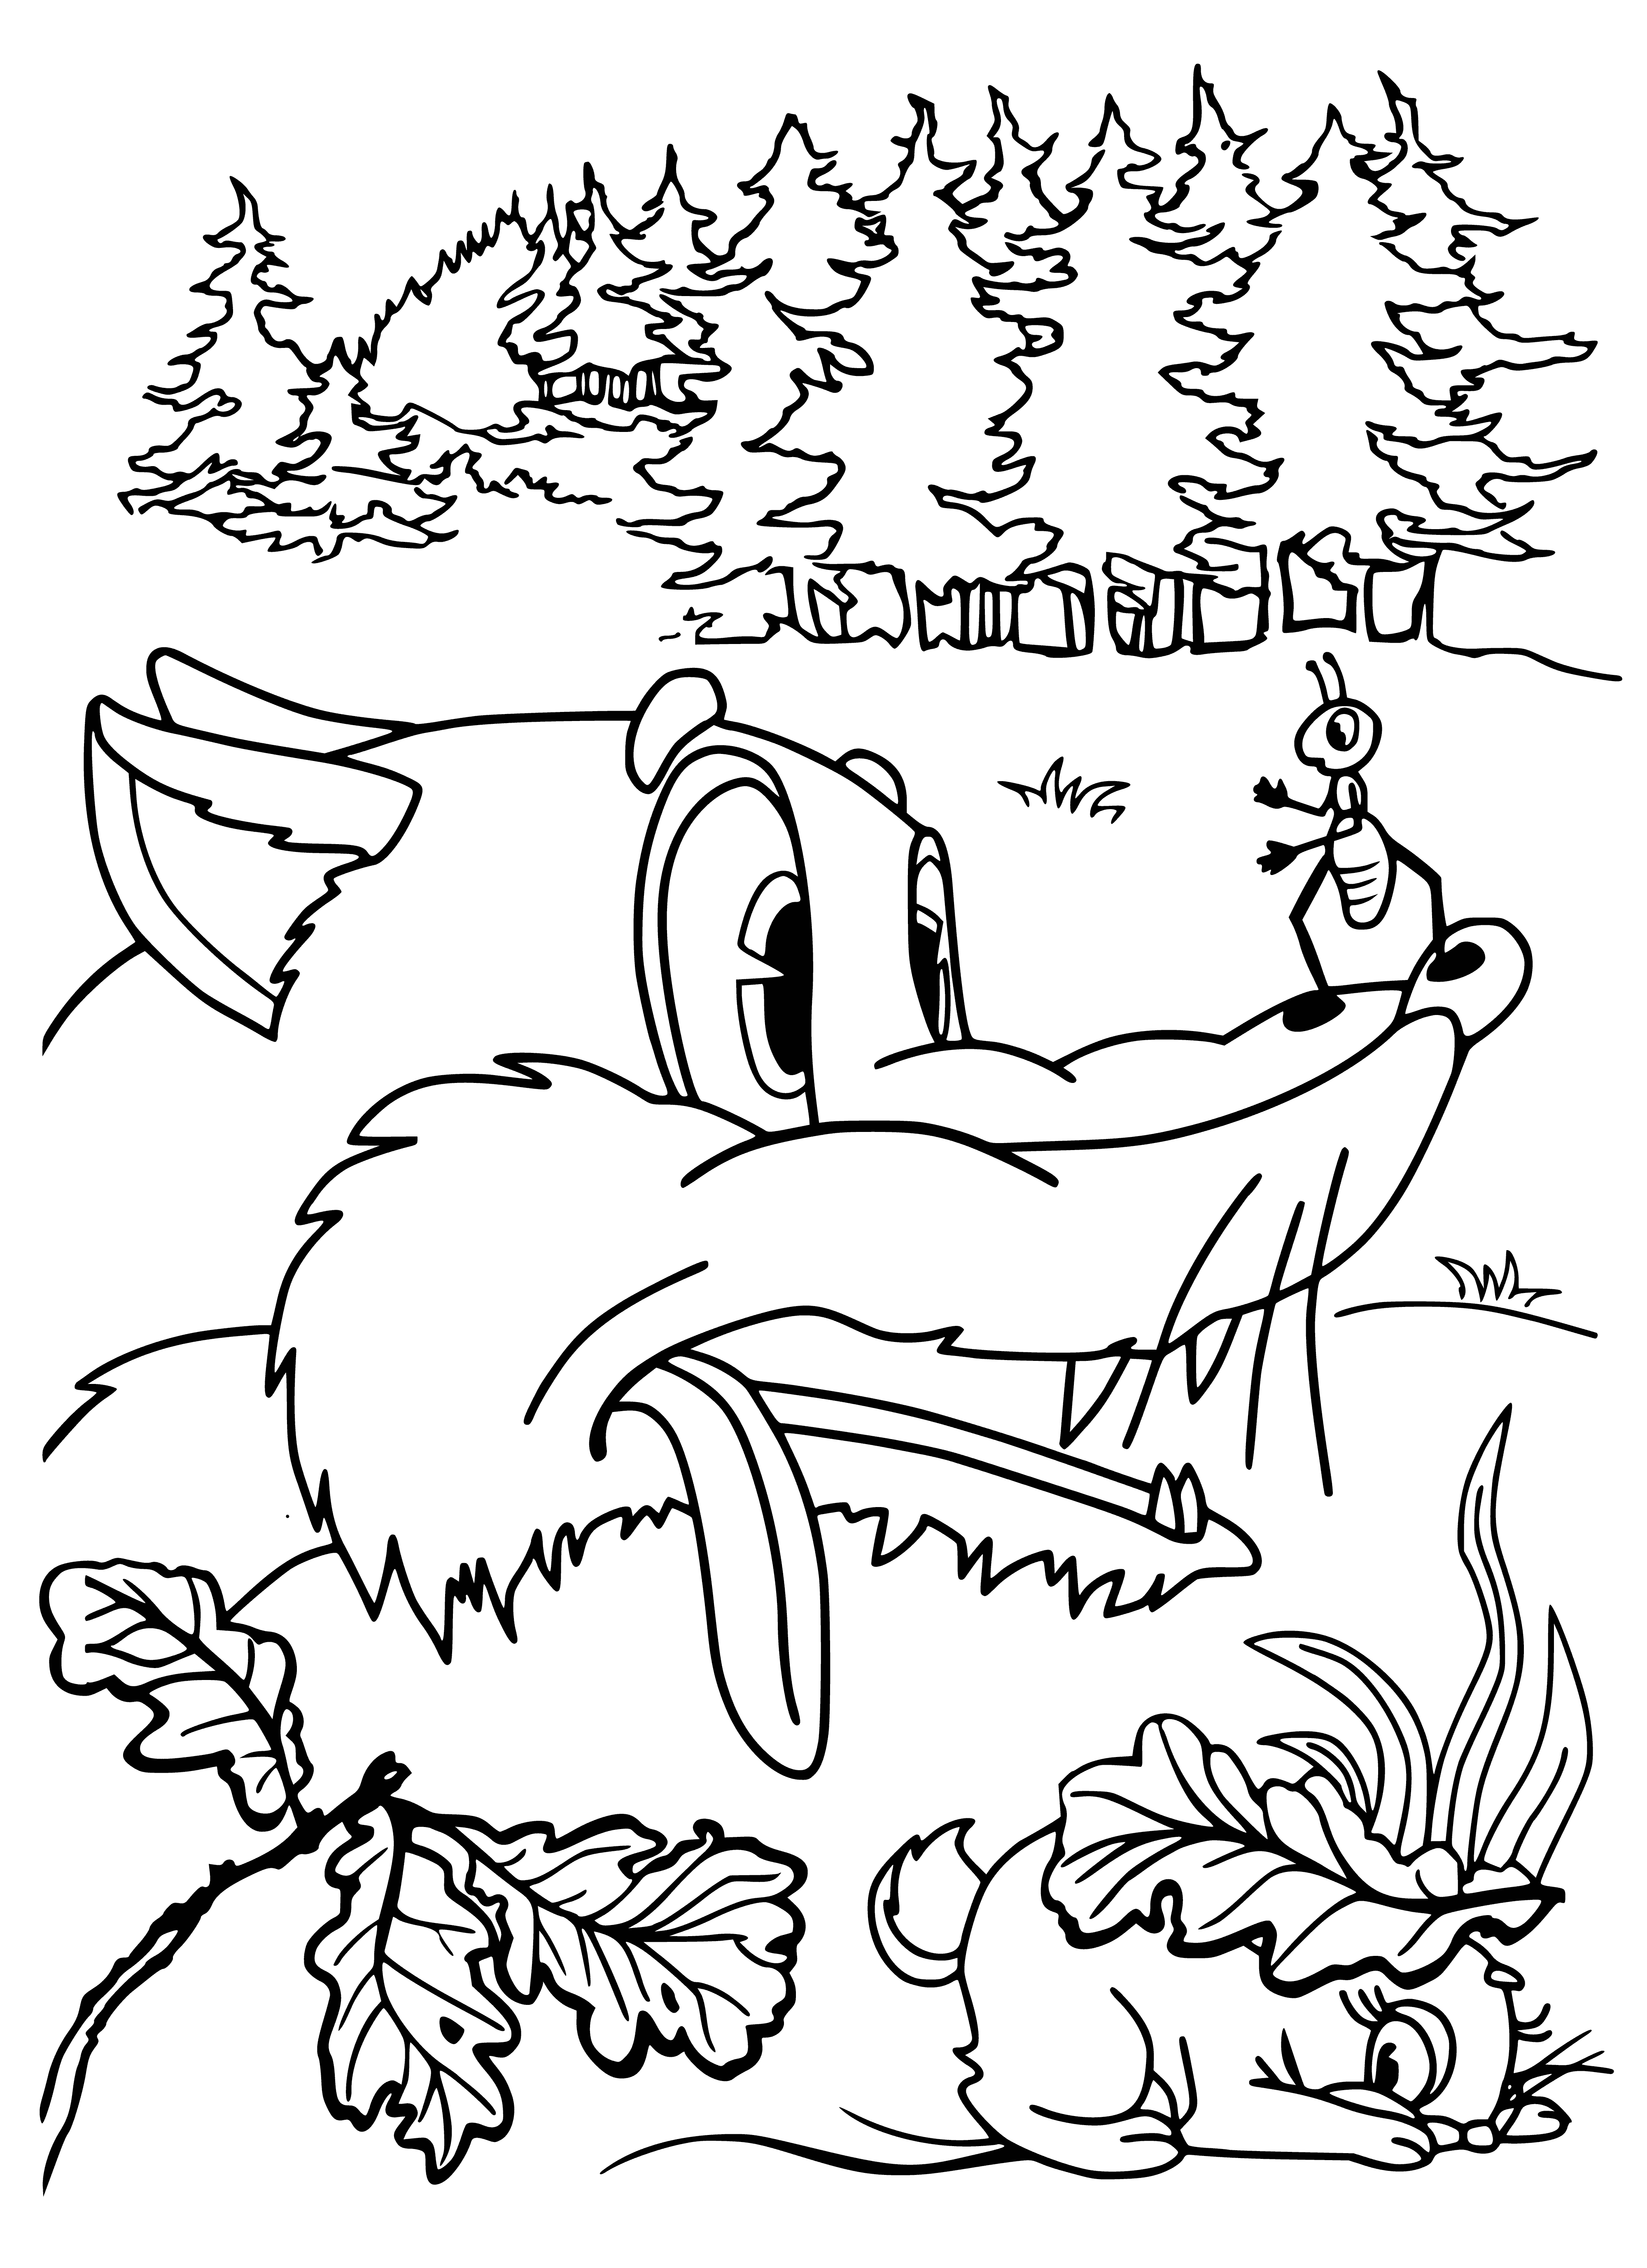 coloring page: Ant crawls on sleeping hare's head, its size so much smaller.